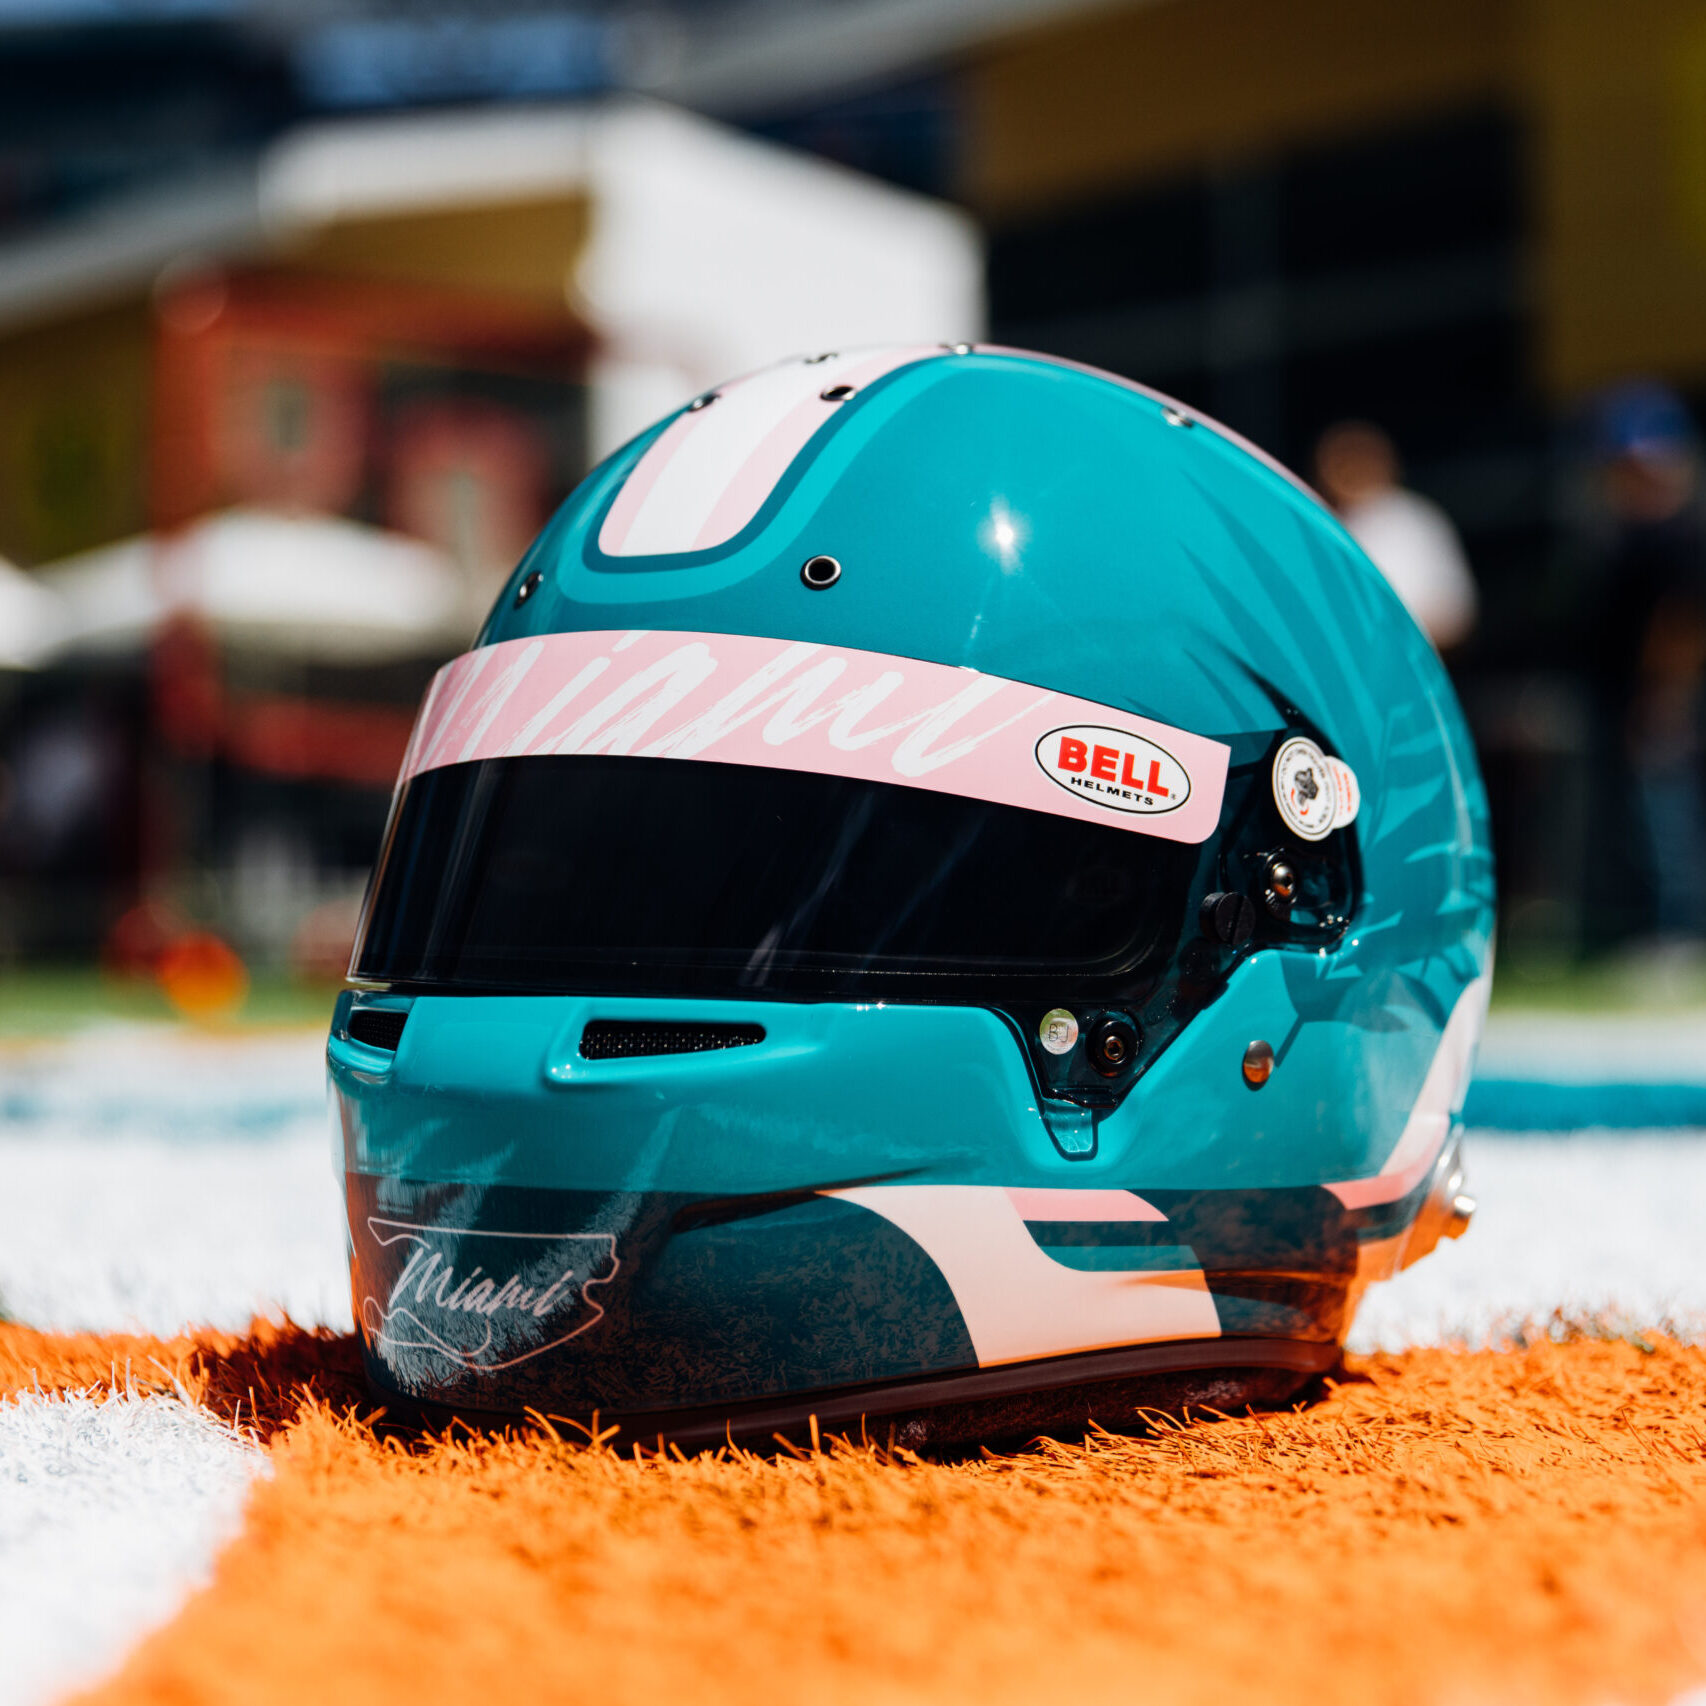 Full size bell racing helmet in colors aqua and black with a black visore